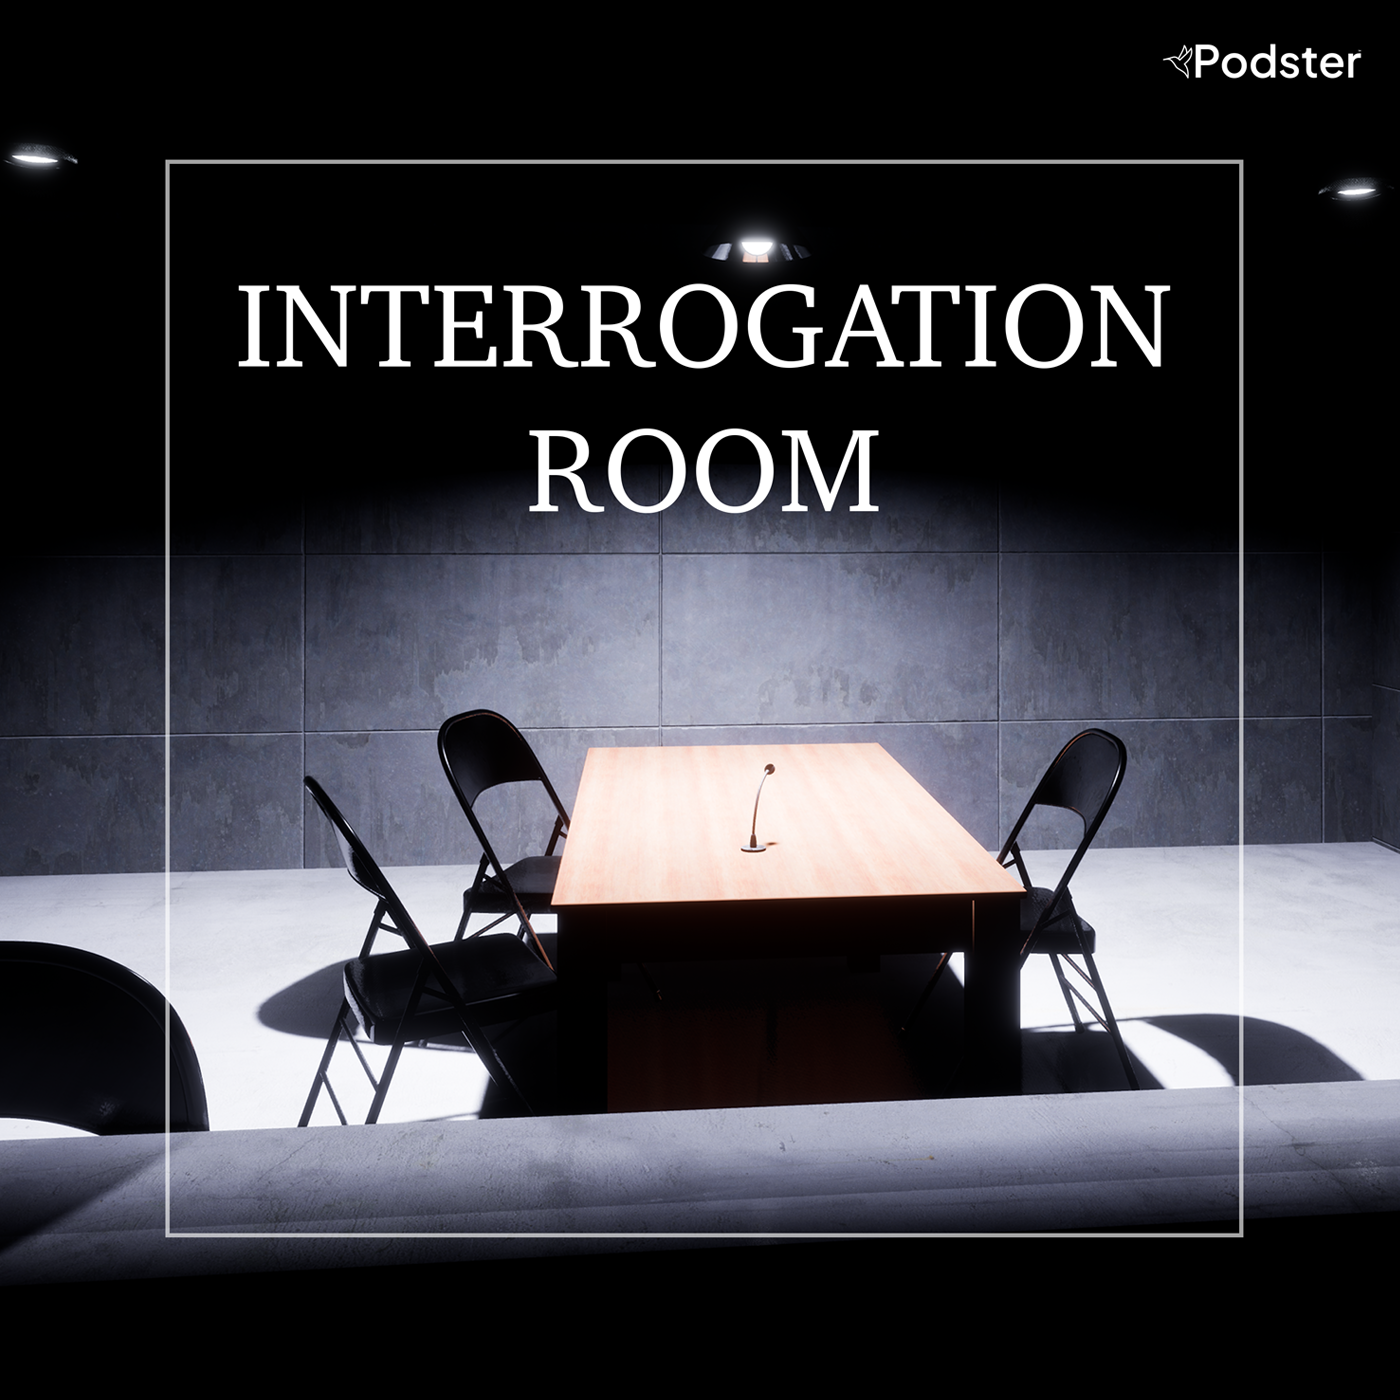 INTERROGATION ROOM <br> Join us in the interrogation room where you will get an insight into actual perpetrators’ minds and how detectives break down a case word for word.